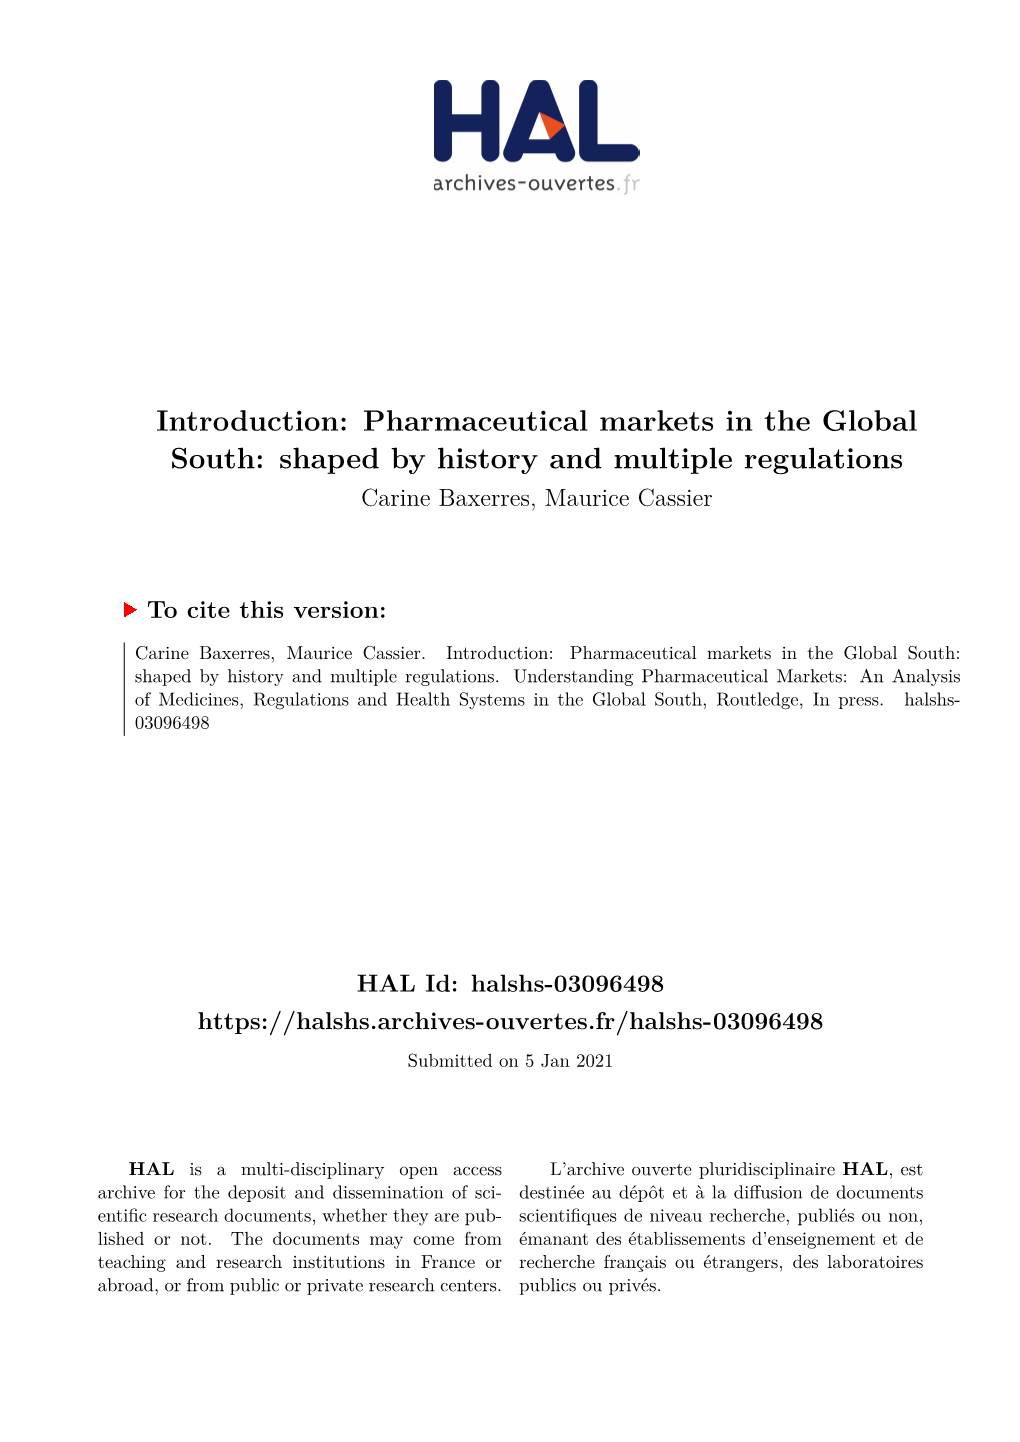 Introduction: Pharmaceutical Markets in the Global South: Shaped by History and Multiple Regulations Carine Baxerres, Maurice Cassier